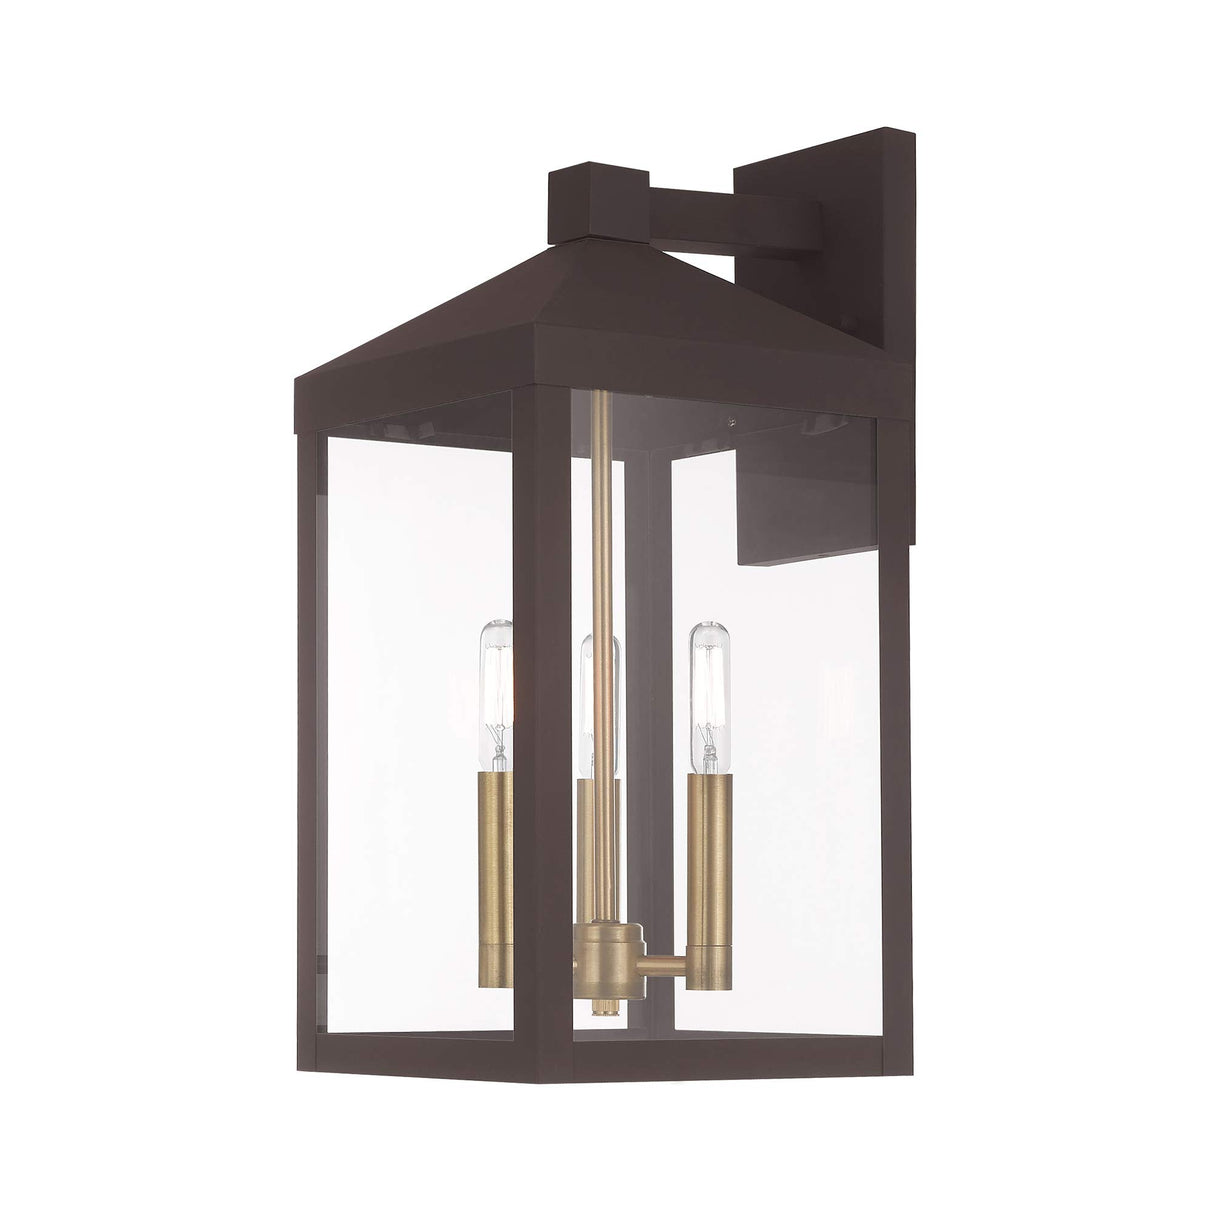 Livex Lighting 20584-07 Transitional Three Light Outdoor Wall Lantern from Nyack Collection in Bronze/Dark Finish